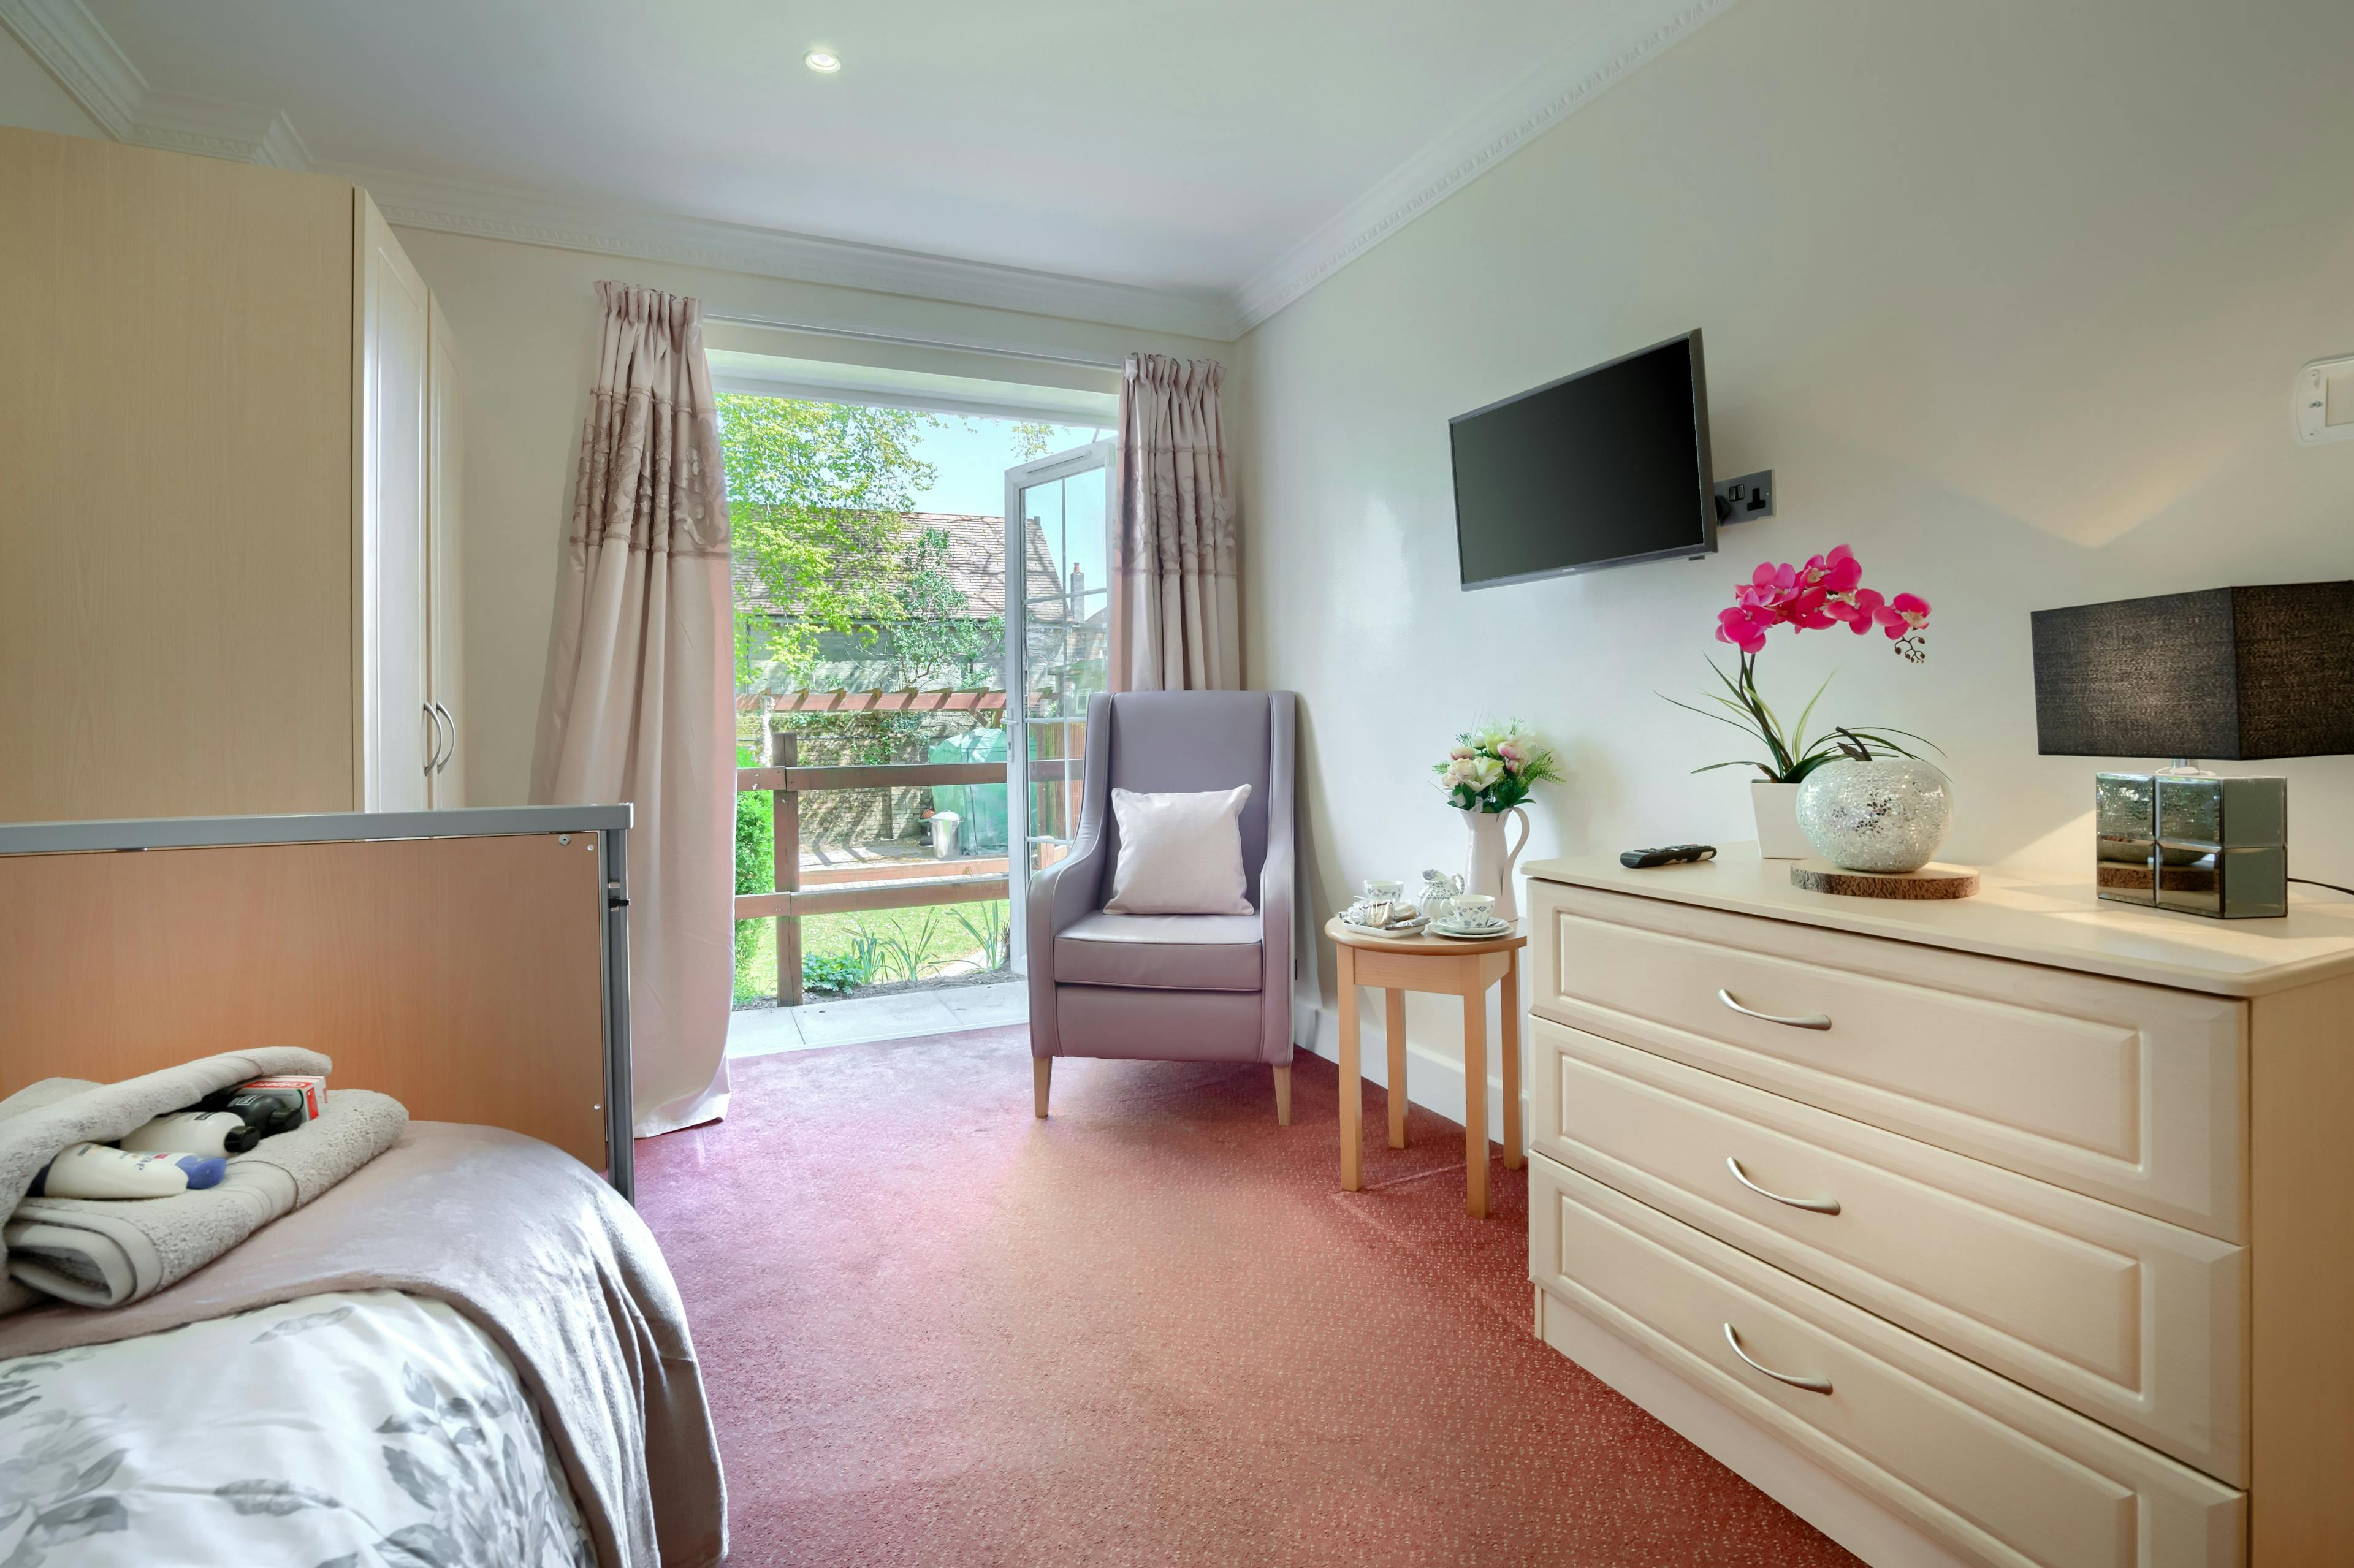 Bedroom of Aranlow House Care Home in Poole, Dorset